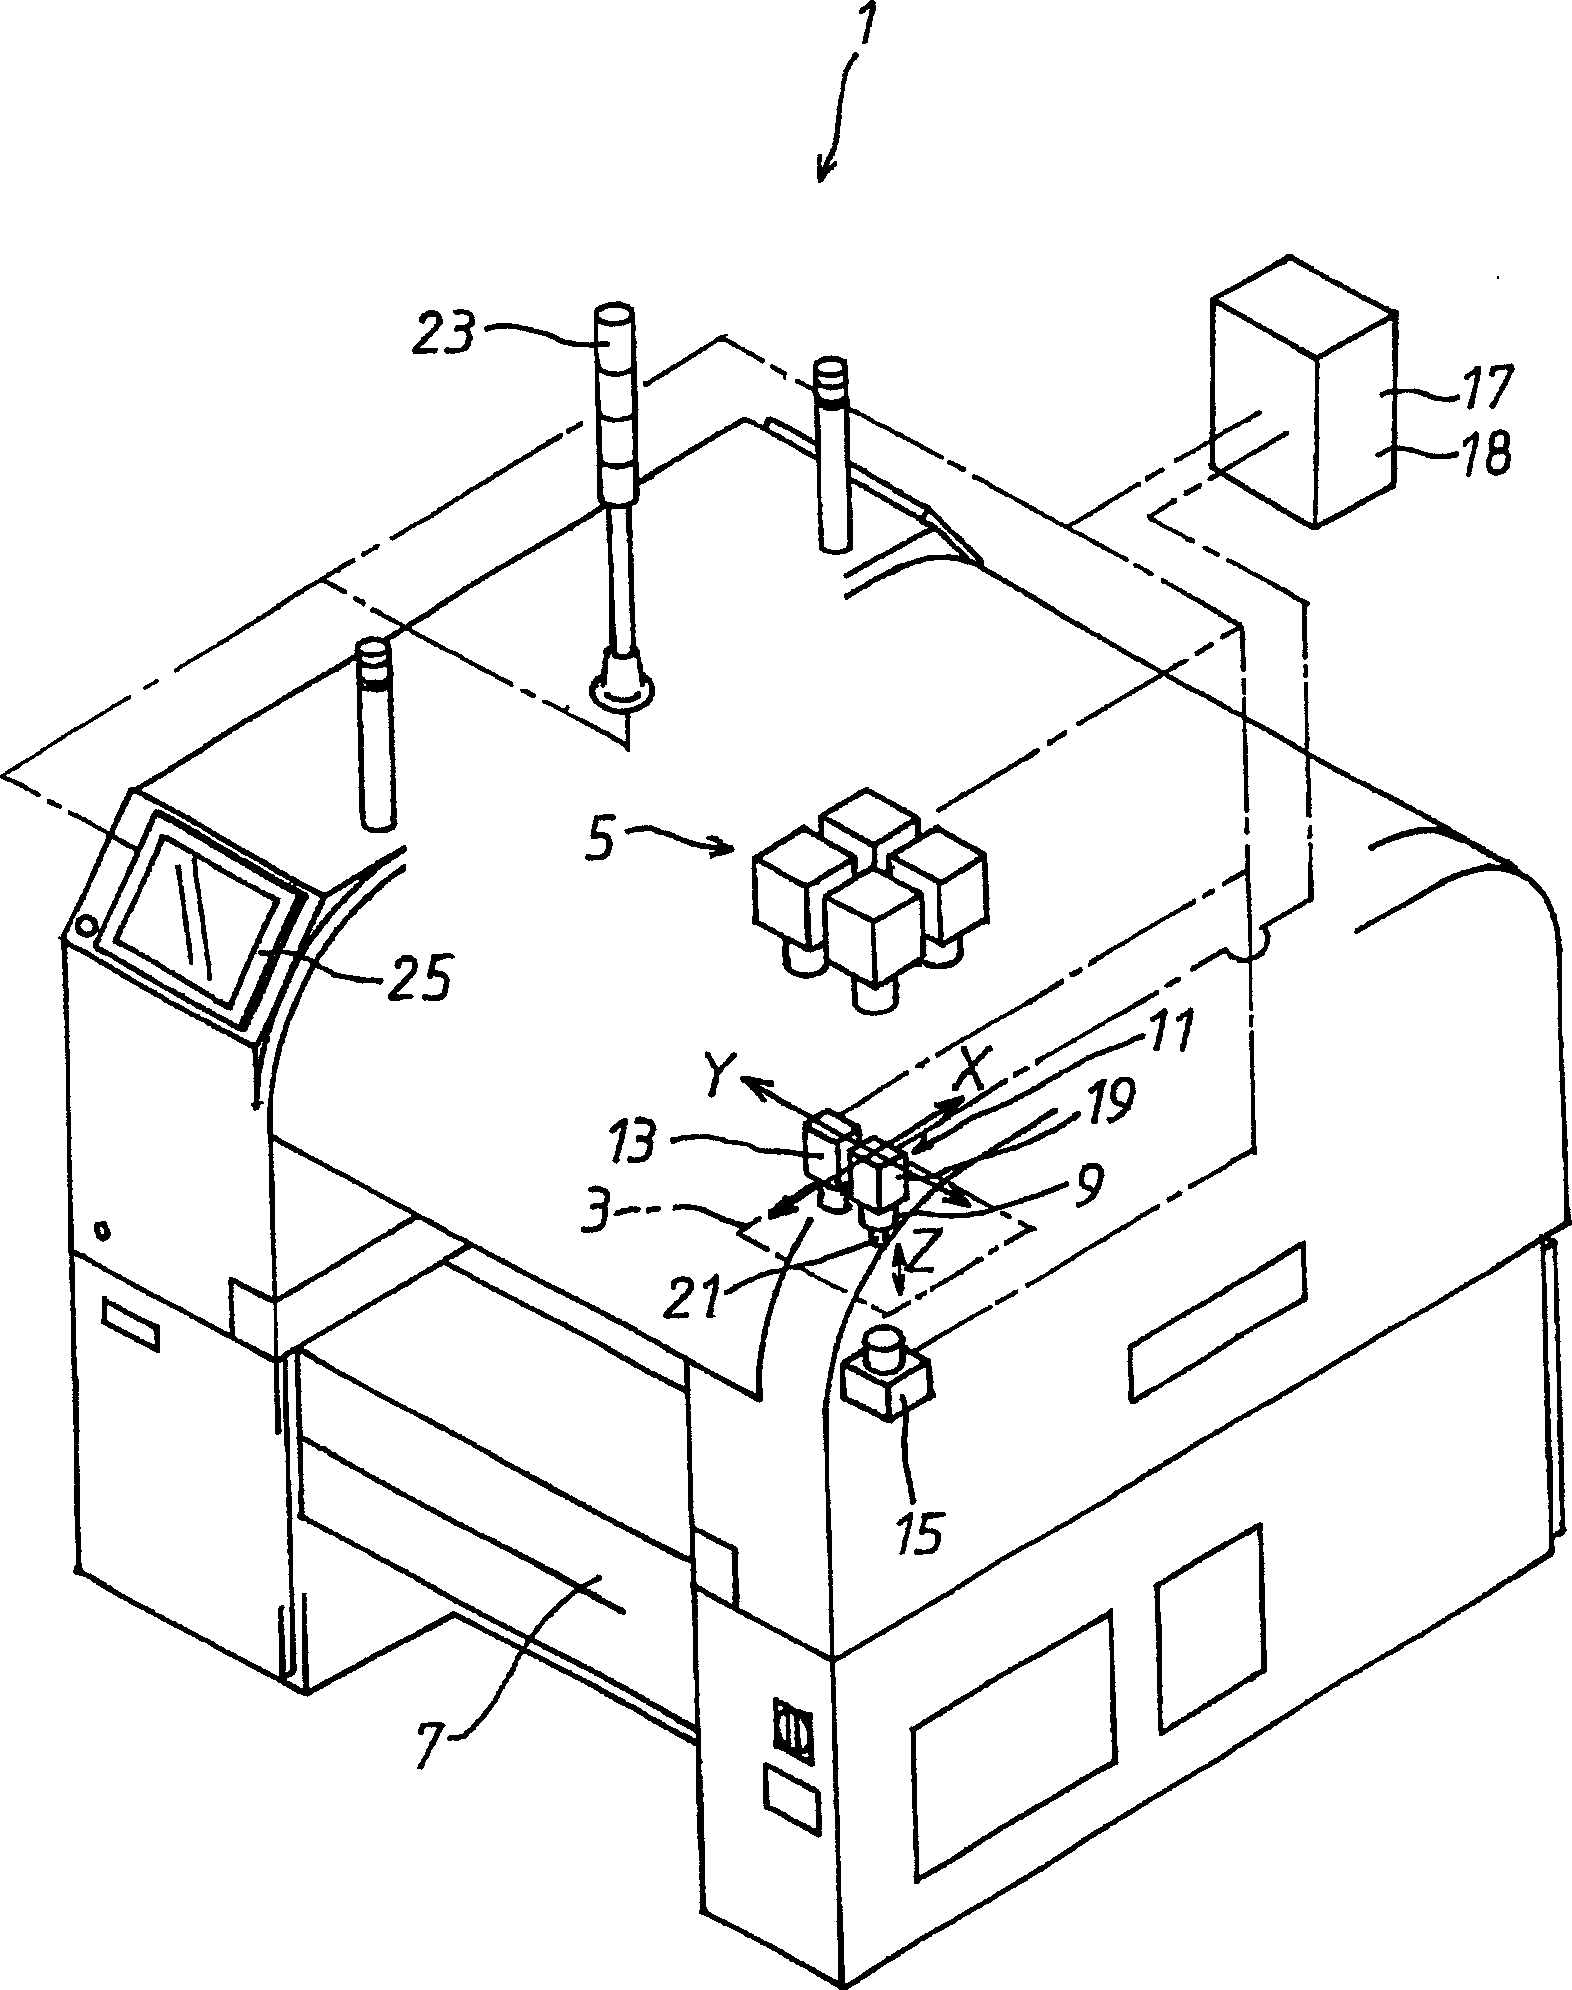 Inspection method and apparatus for mounted electronic components